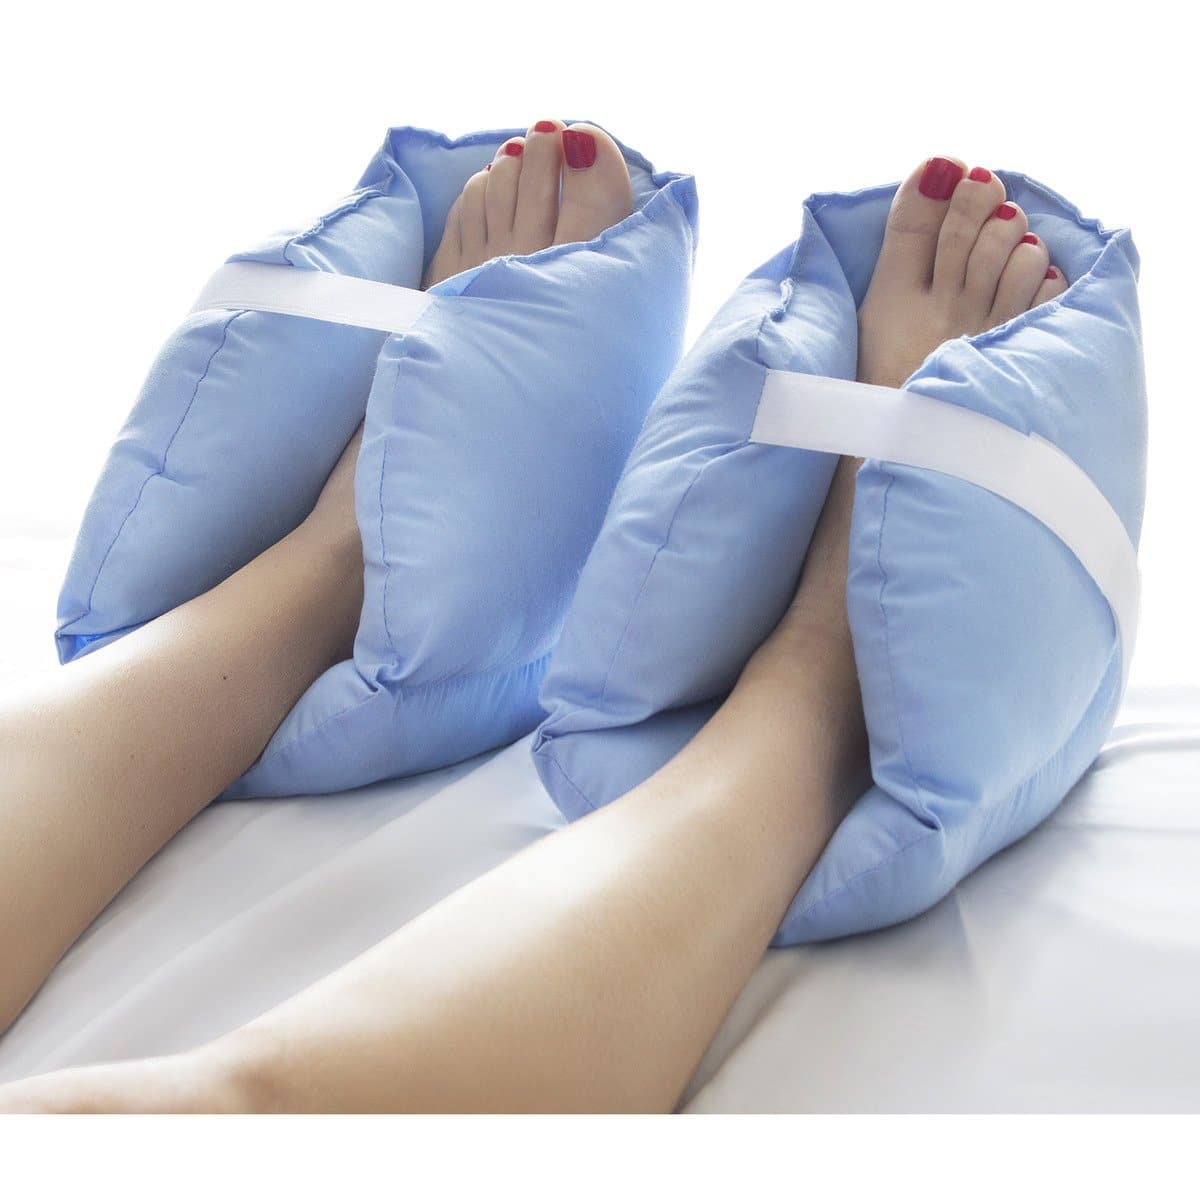 DMI Heel Cushion Protector Pillow to Relieve Pressure from Sores and Ulcers - Senior.com Heel Protectors